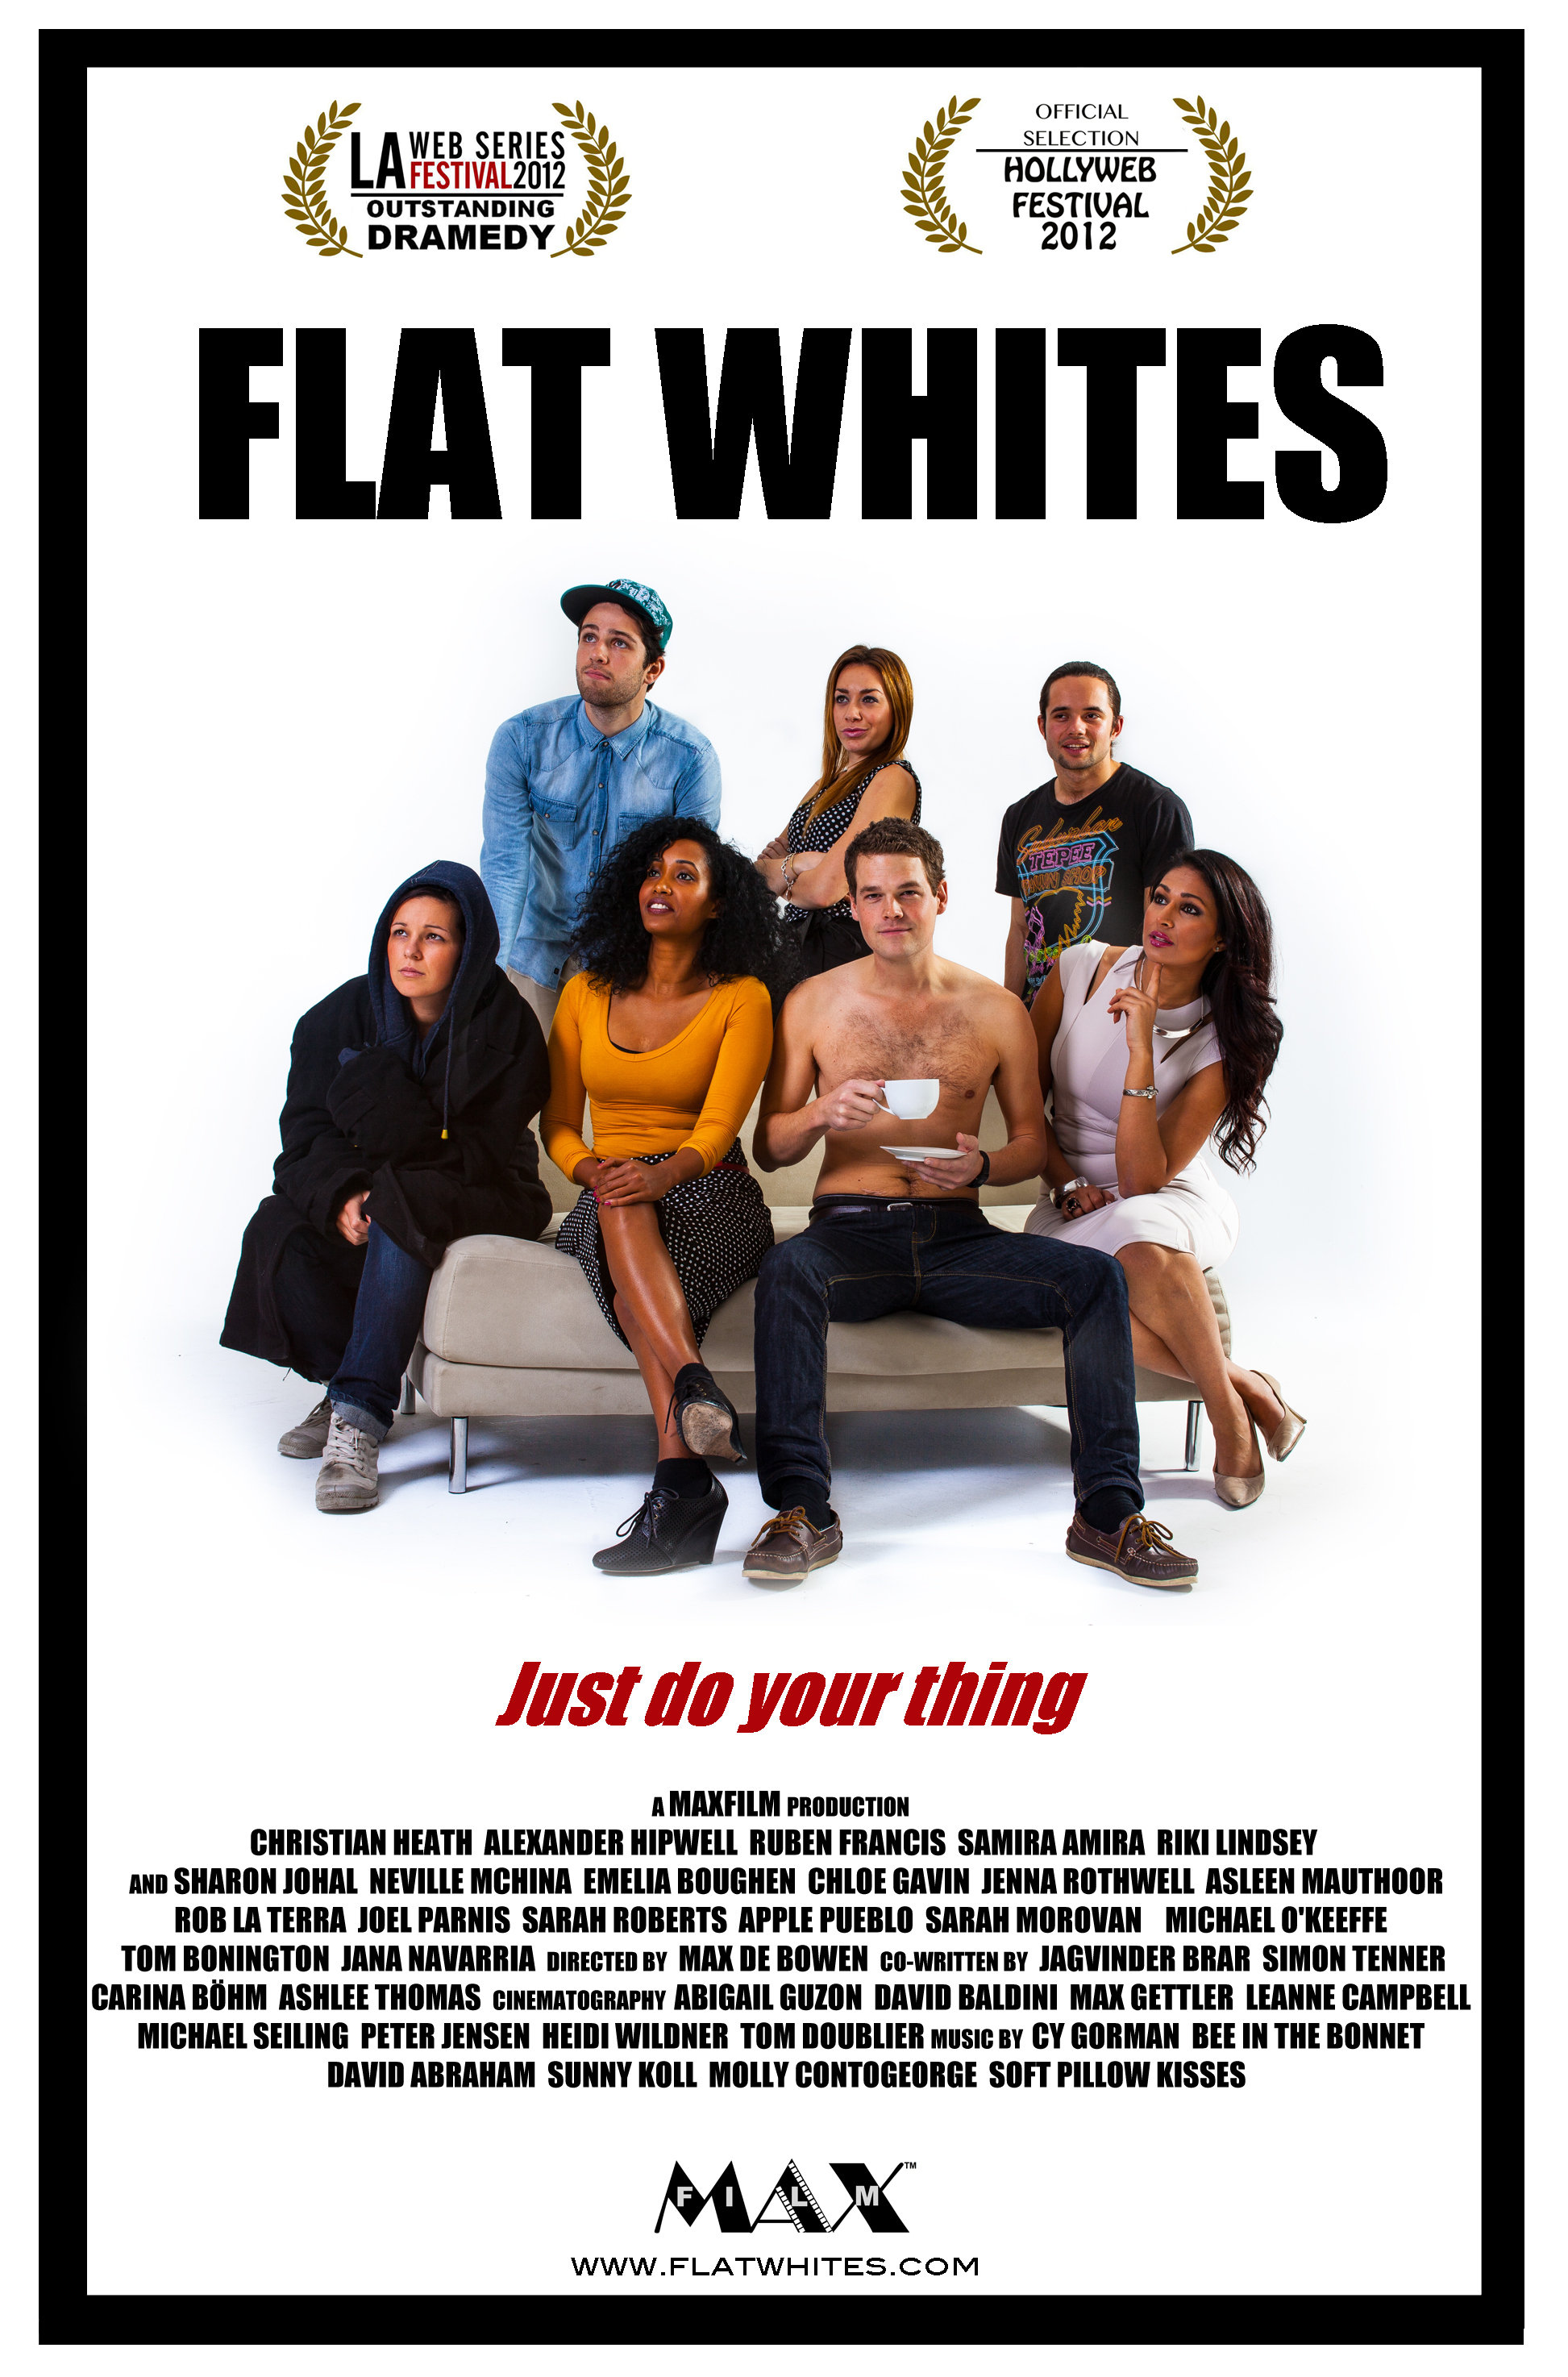 Flat Whites 2012 Poster. Pictured (L-R): Sarah Morovan, Joel Parnis, Samira Amira, Jenna Rothwell, Christian Heath, Max De Bowen & Sharon Johal. Award Laurels for 'Outstanding Dramedy' from LA Webfest 2012 & 'Official Selection' from Hollyweb Festival 2012.